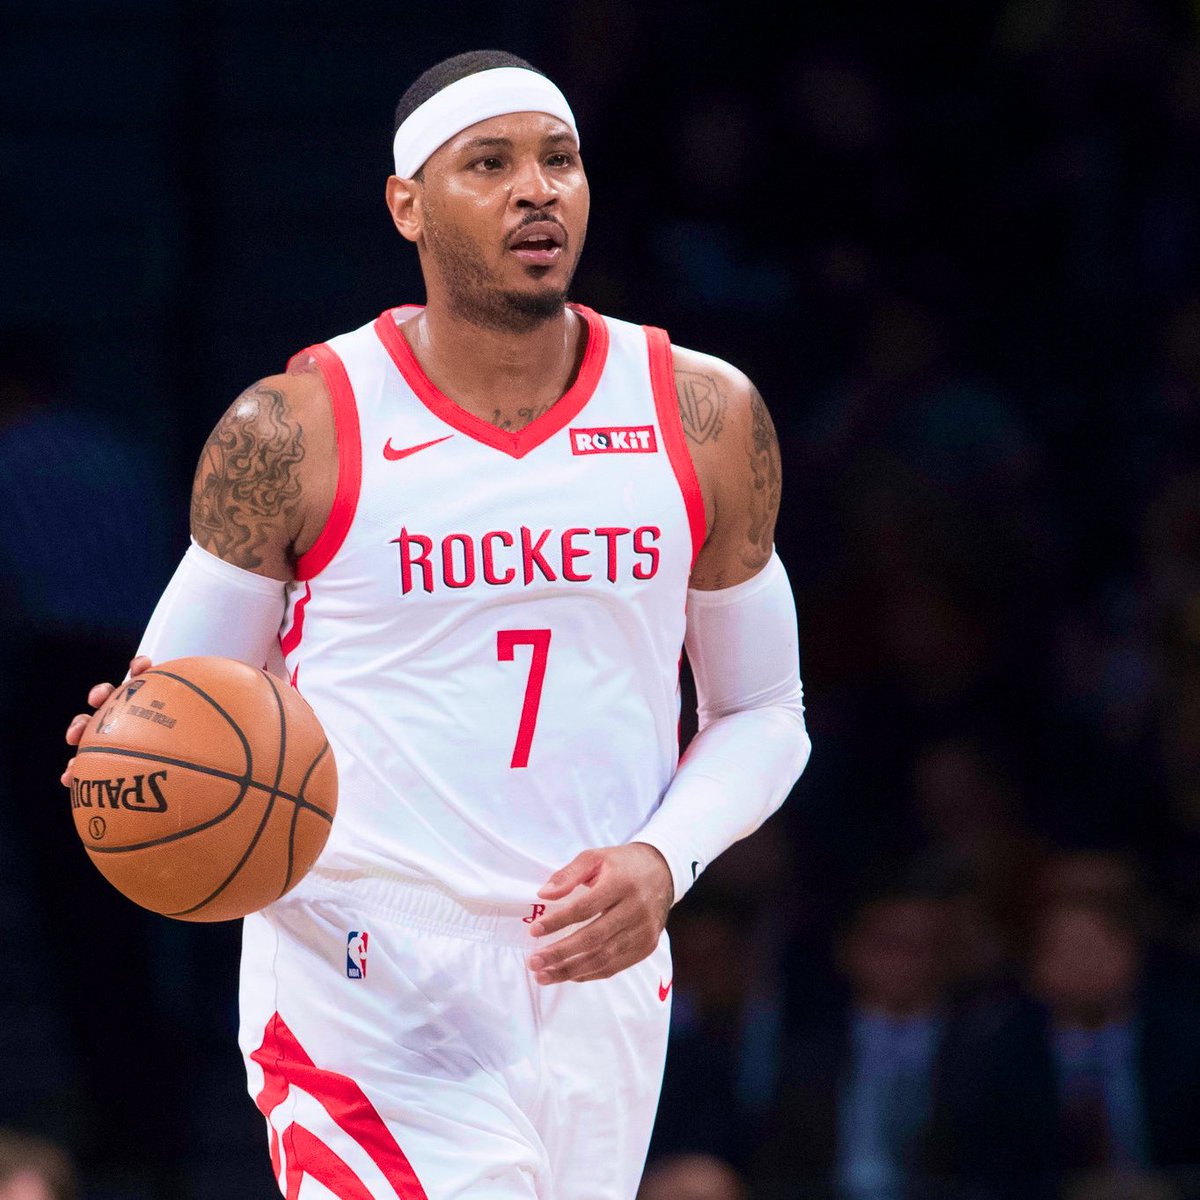 Carmelo Anthony played the only 10 games of his Houston Rockets career in 2018.